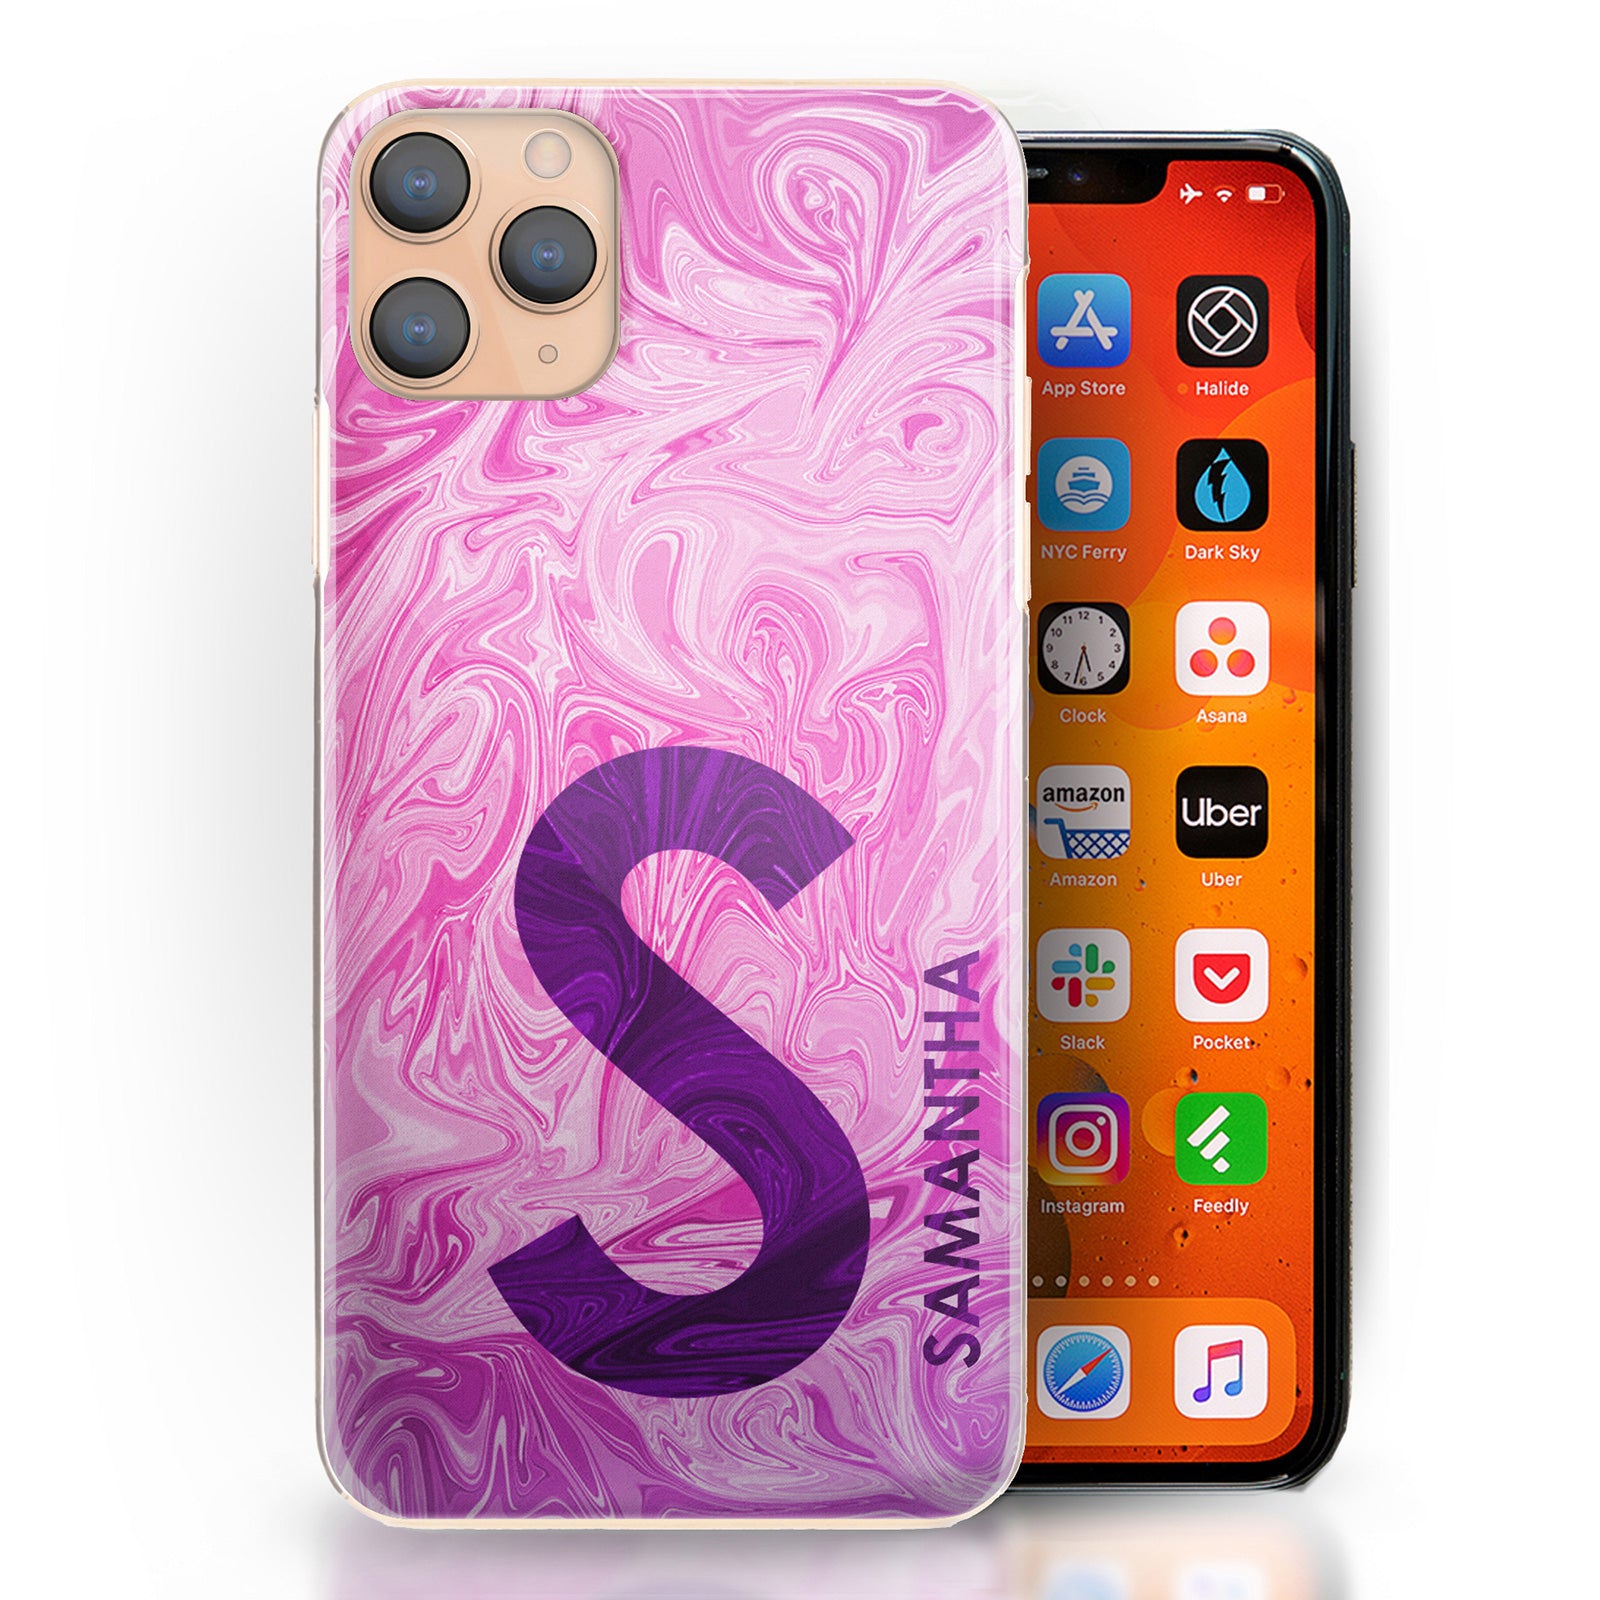 Personalised One Phone Hard Case with Purple Text and Initial on Pink Swirled Marble